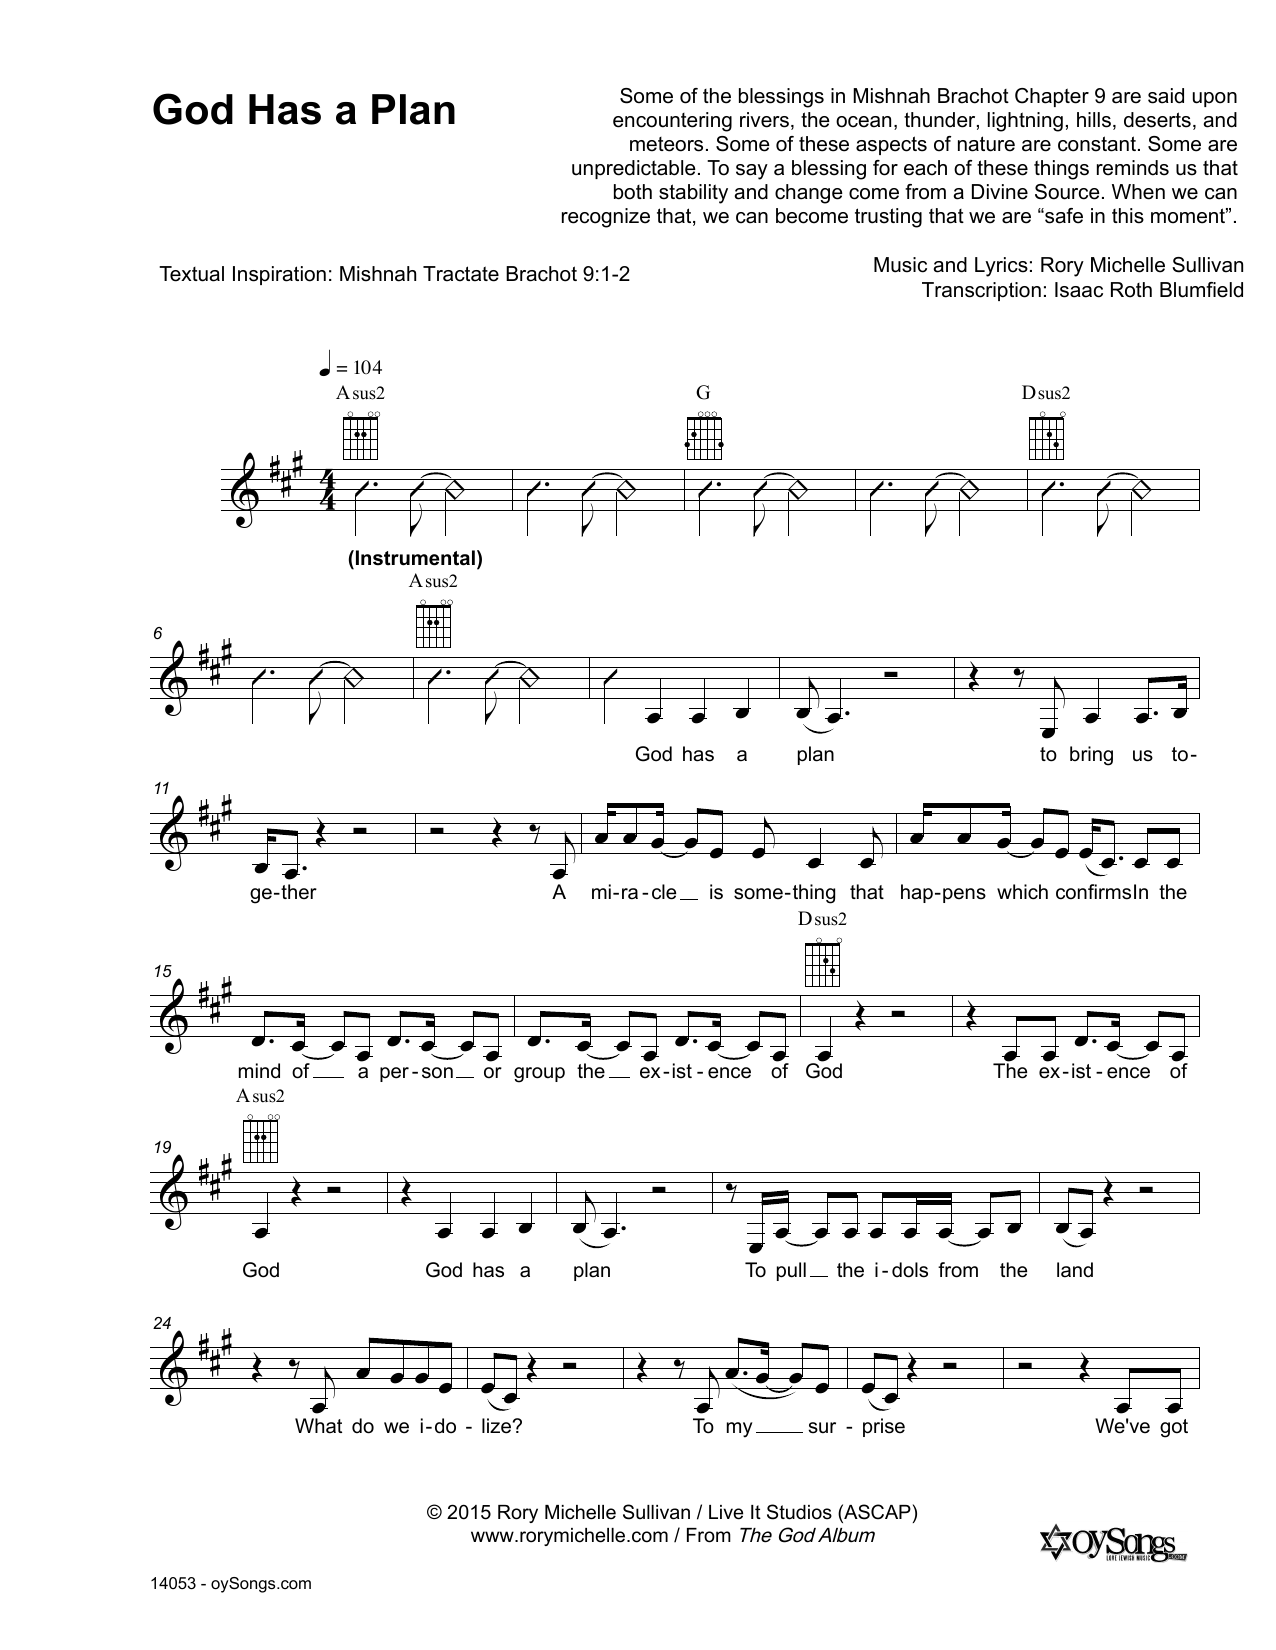 Download Rory Michelle Sullivan God Has a Plan Sheet Music